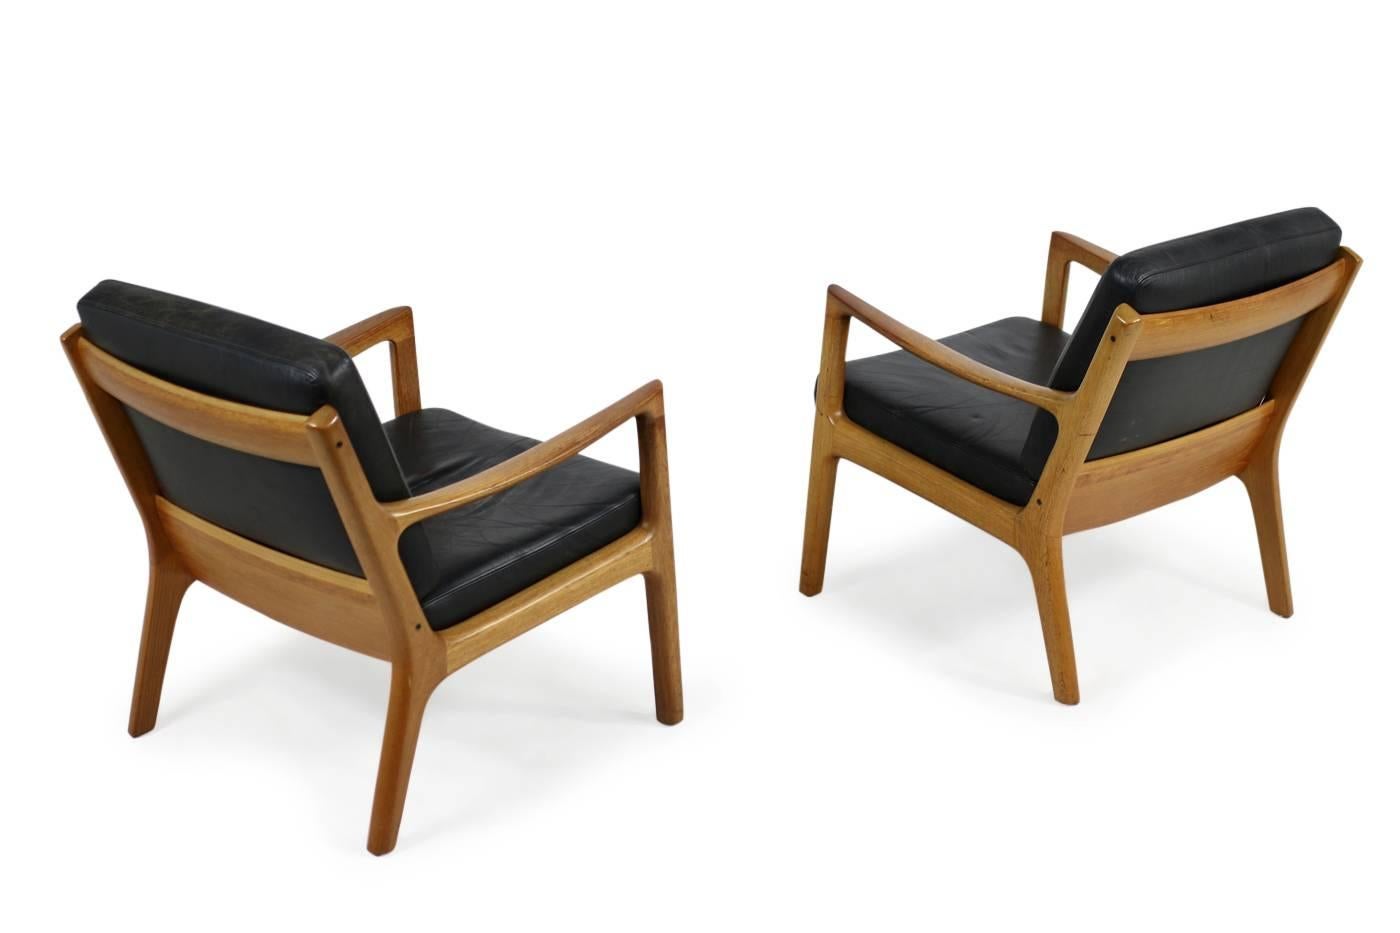 Pair of 1960s, Danish Vintage Lounge Chairs Ole Wanscher Teak and Black Leather 1